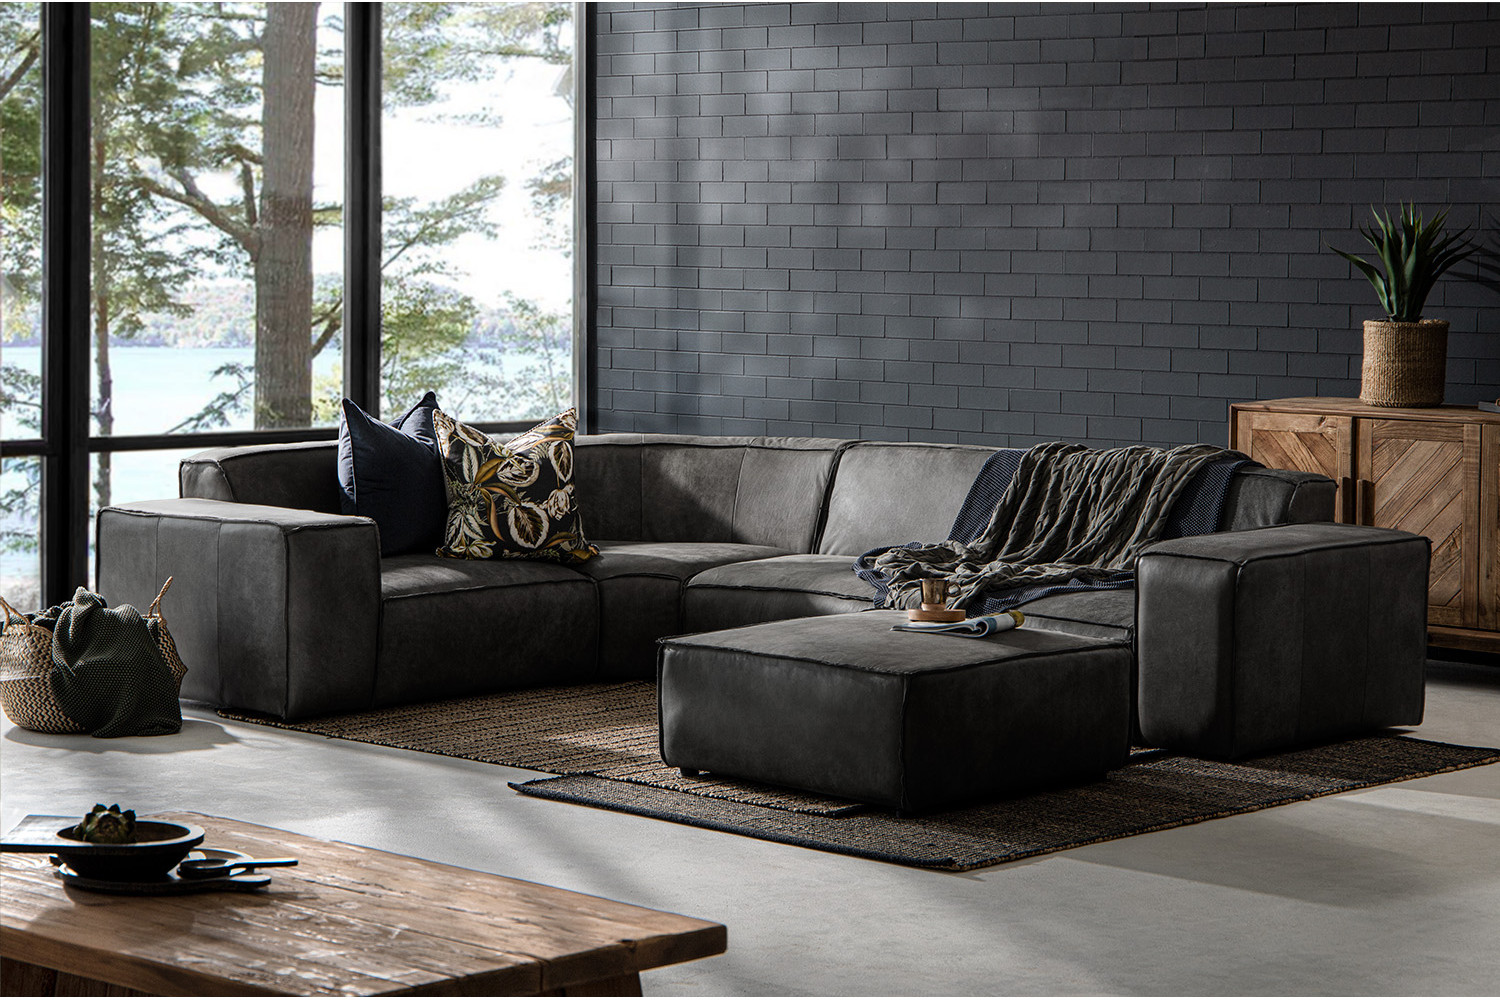 Jagger Leather Modular - Corner Couch With Ottoman - Lead